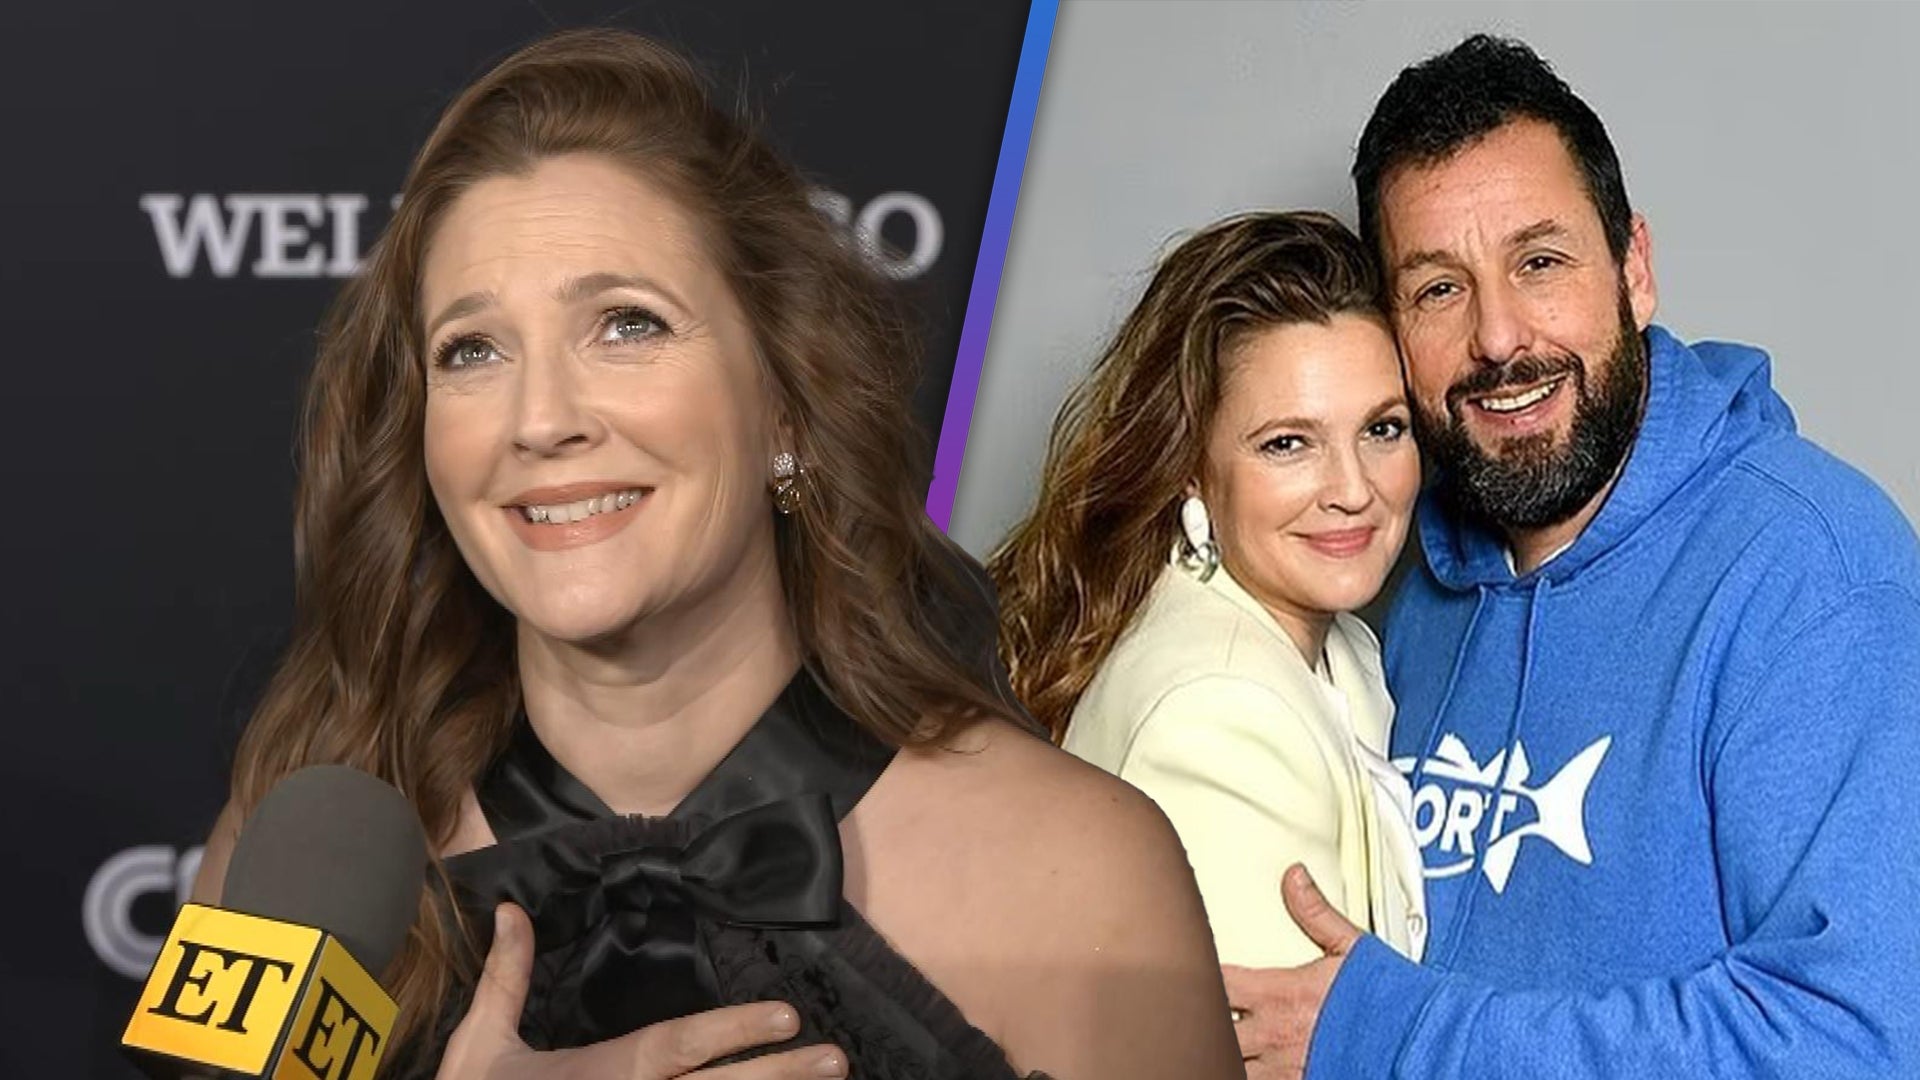 Drew Barrymore Says She and Adam Sandler Are Discussing Next Movie Collab (Exclusive)